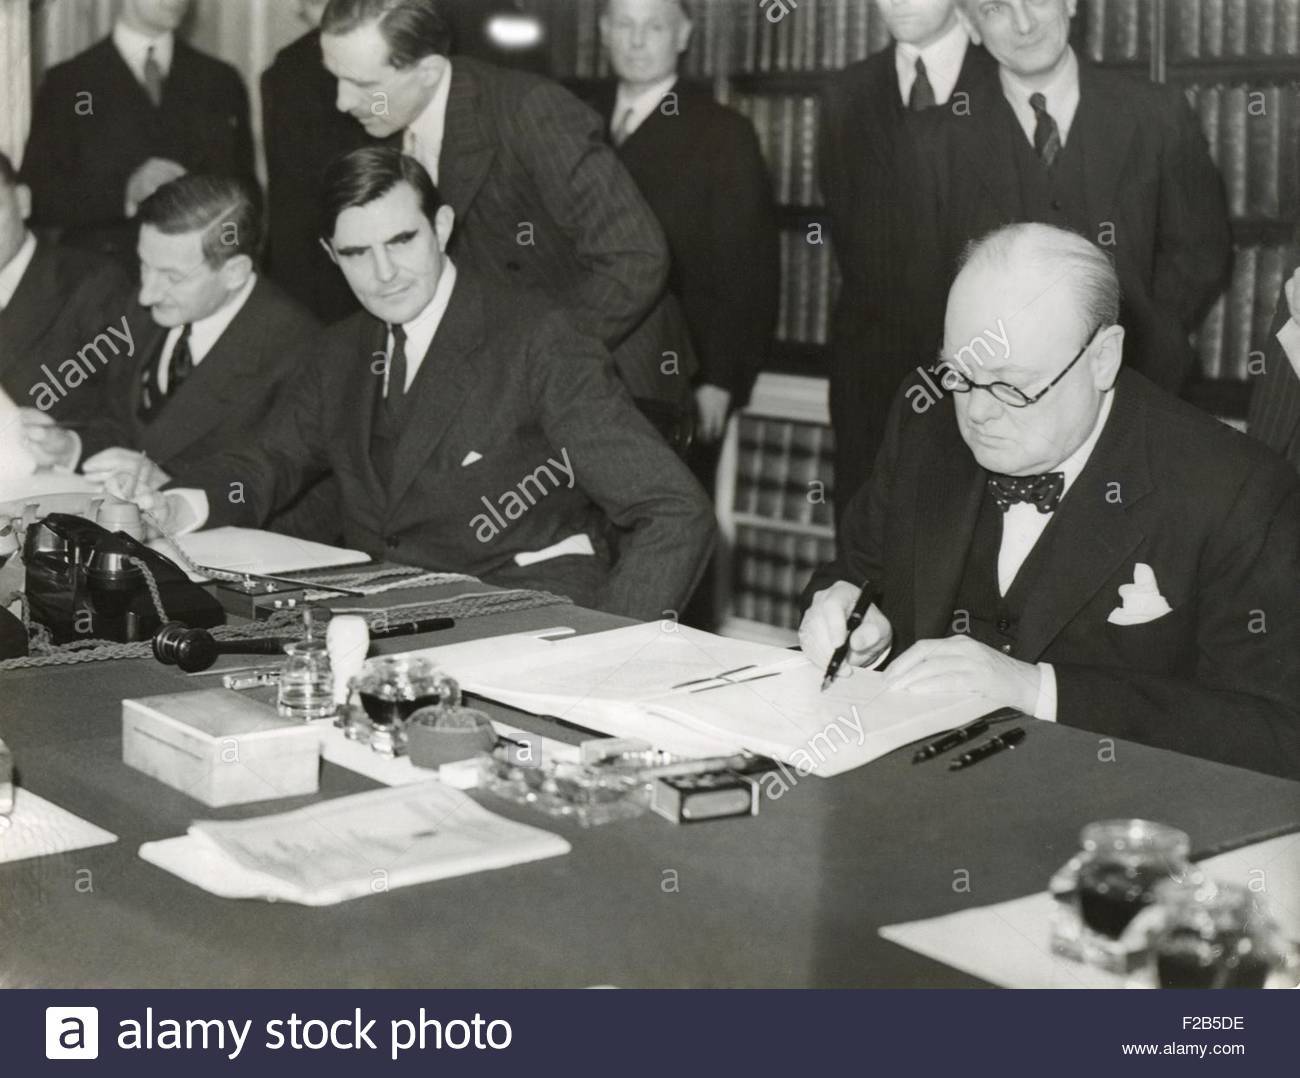 g-the-lend-lease-agreement-to-lease-british-F2B5DE.jpg